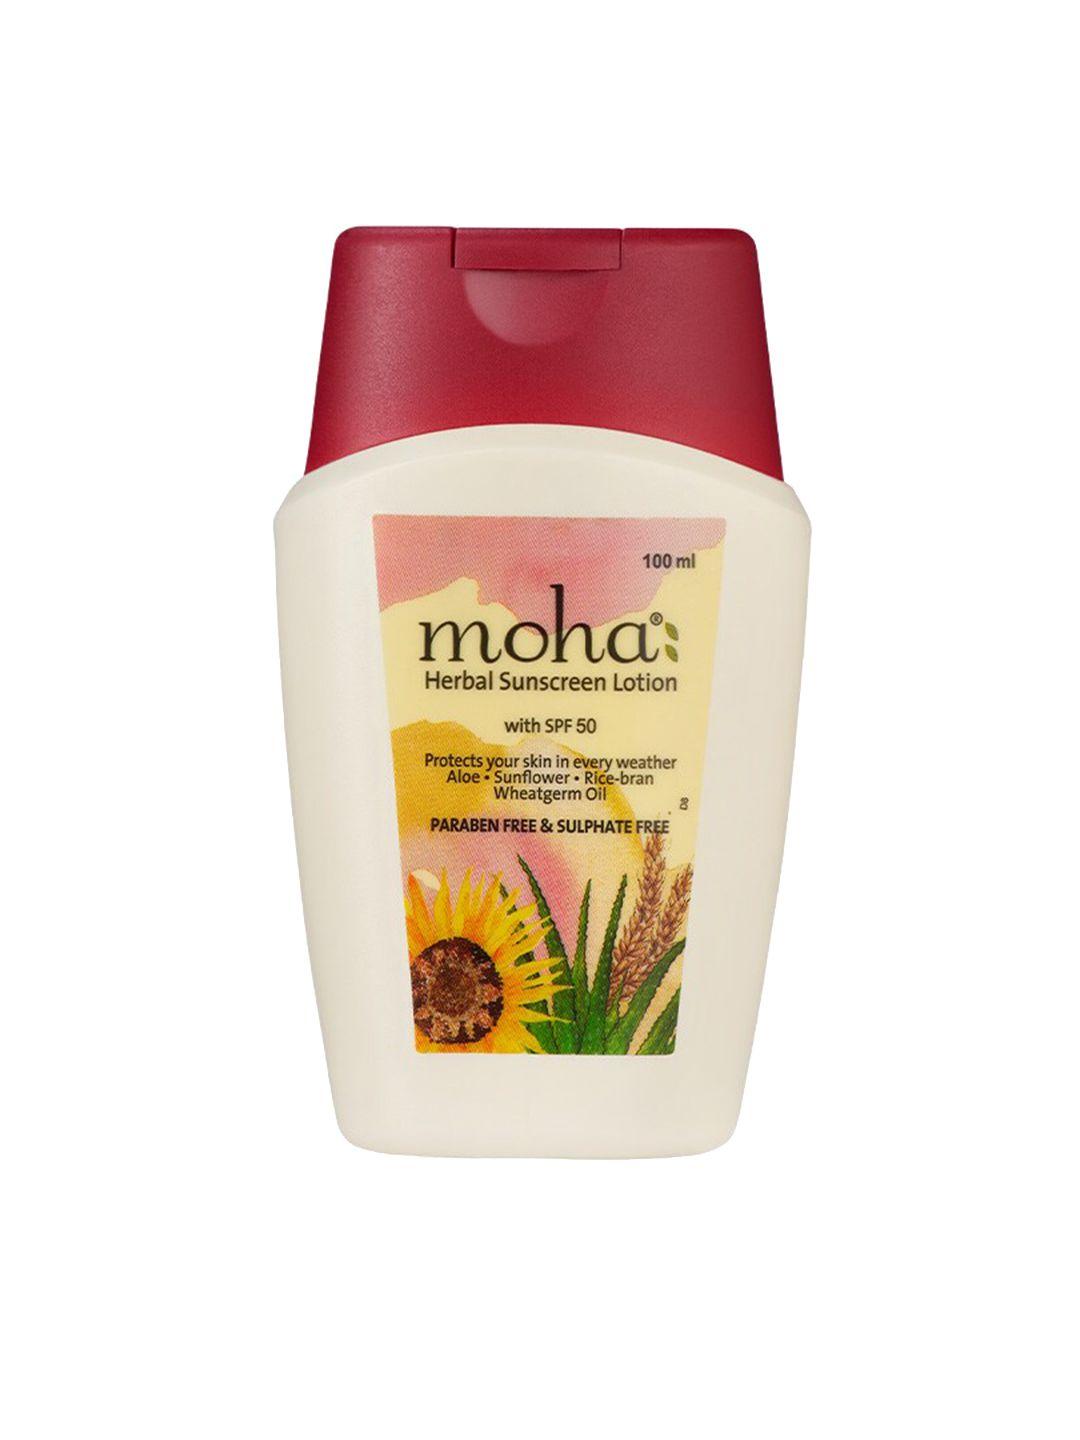 moha spf 50 herbal sunscreen lotion with aloe & wheat germ oil - 100 ml